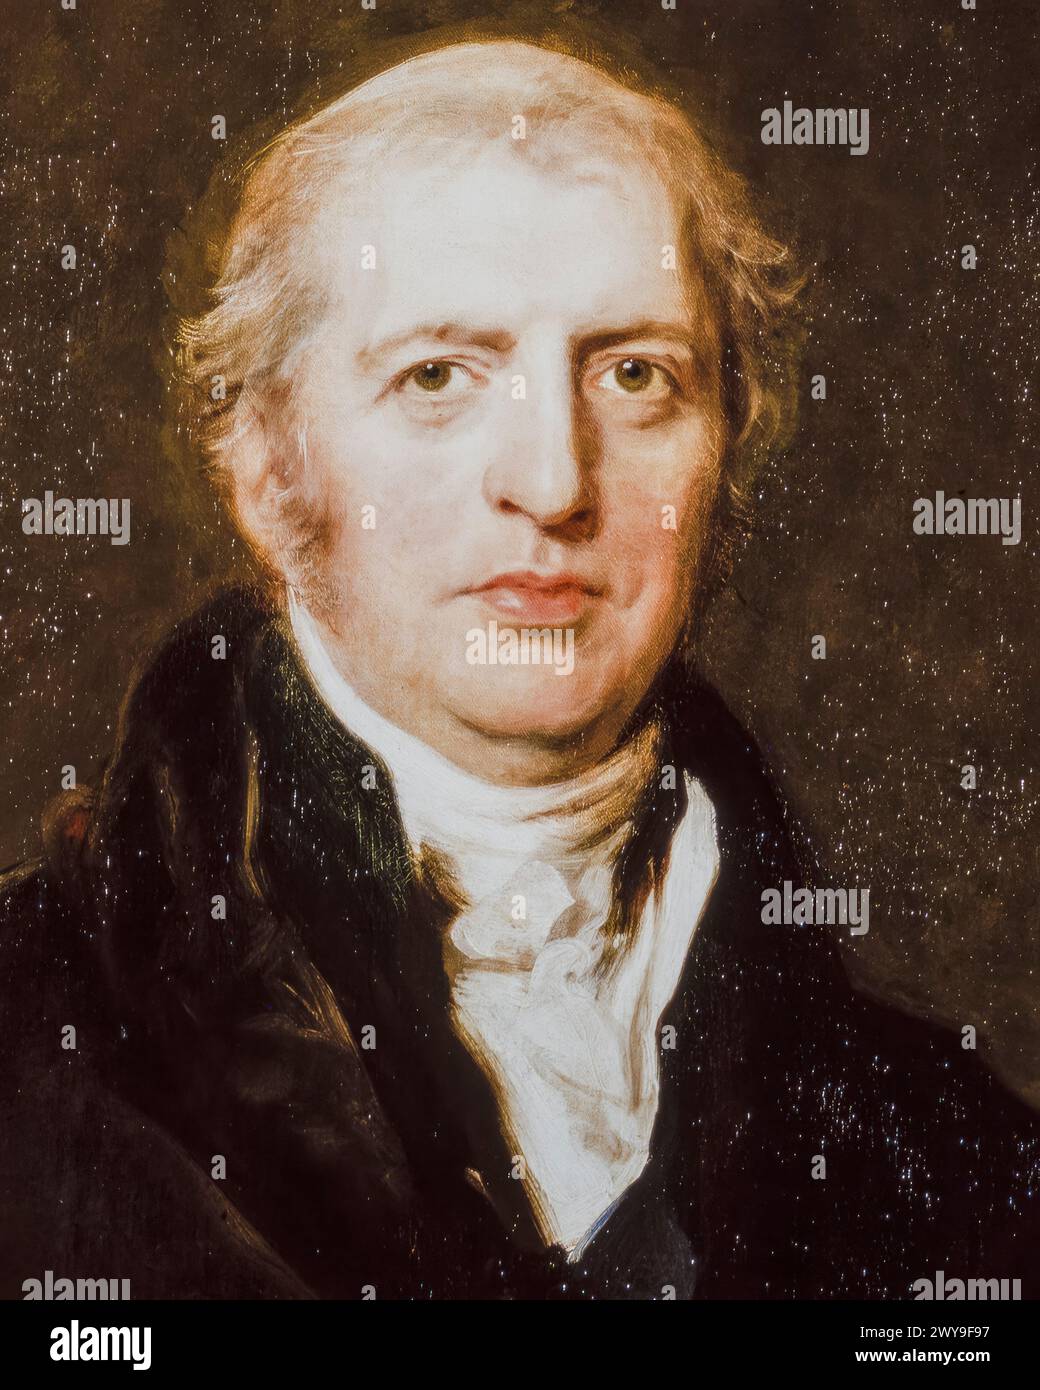 Robert Jenkinson, 2nd Earl of Liverpool (1770-1828), Tory politician and Prime Minister of the United Kingdom, 1812-1827, portrait painting in oil on canvas by Sir Thomas Lawrence, before 1827 Stock Photo